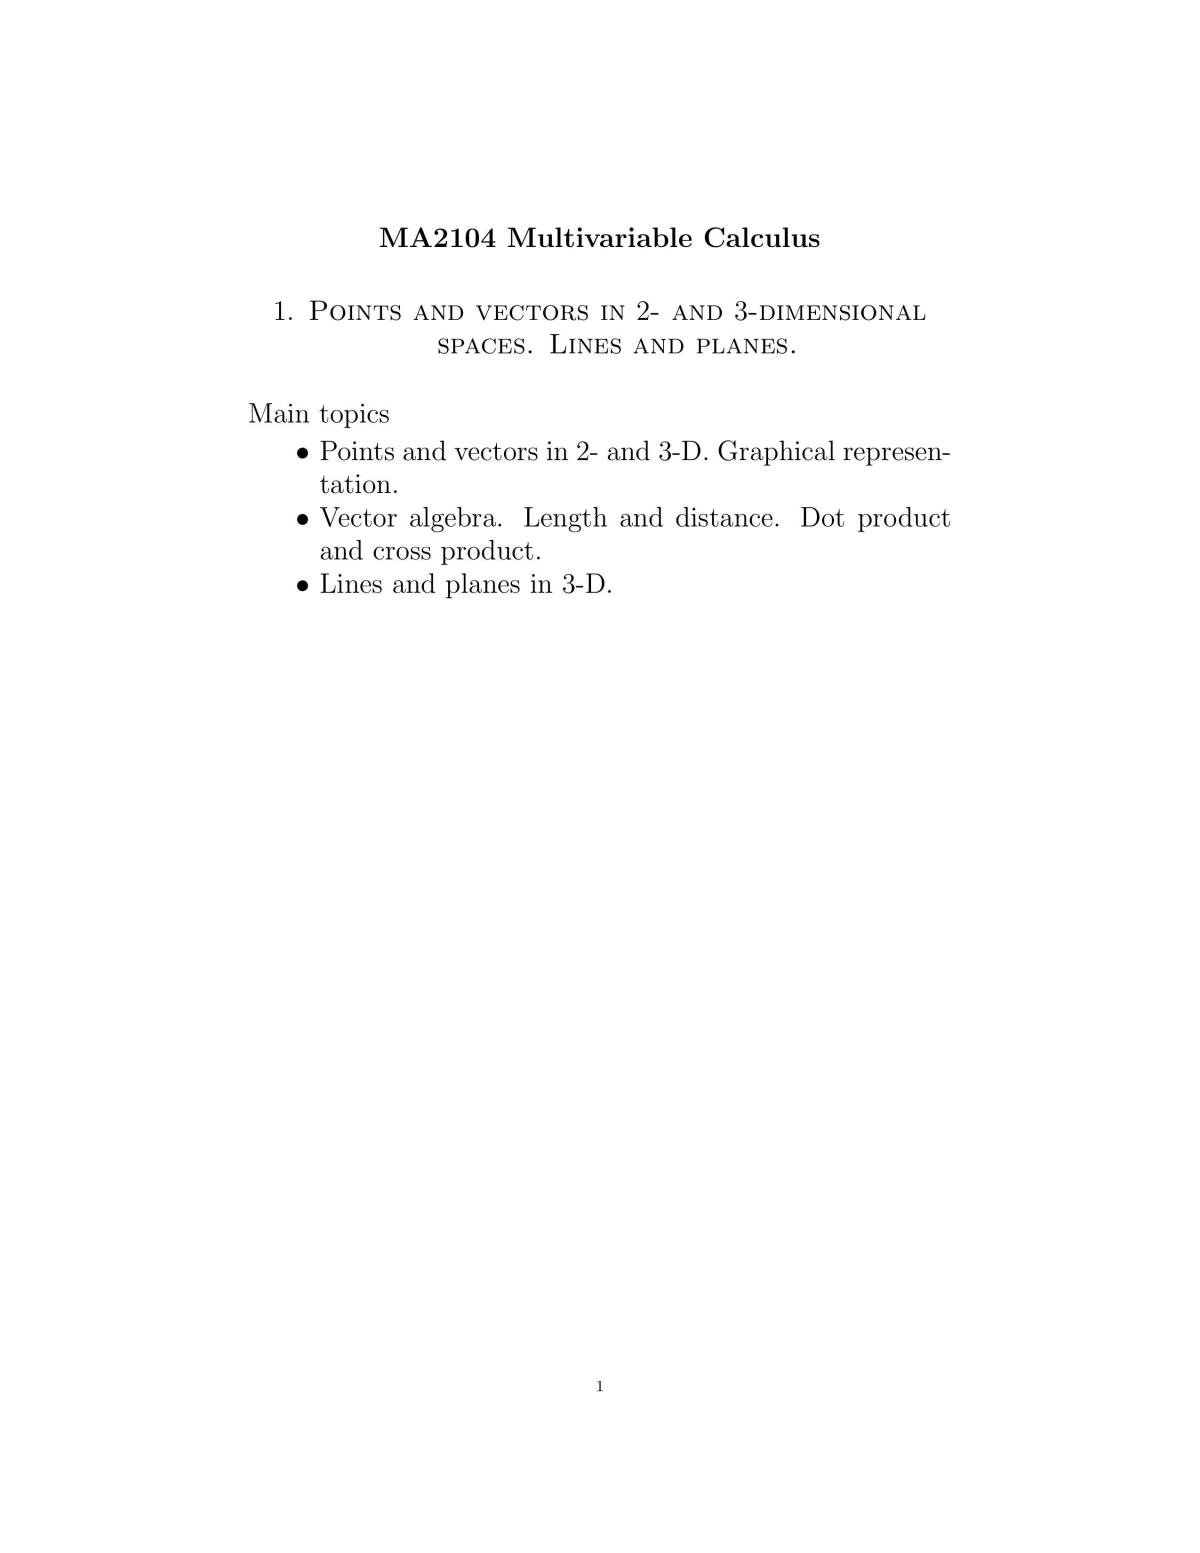 MA2104 Multivariable Calculus Notes - Page 1